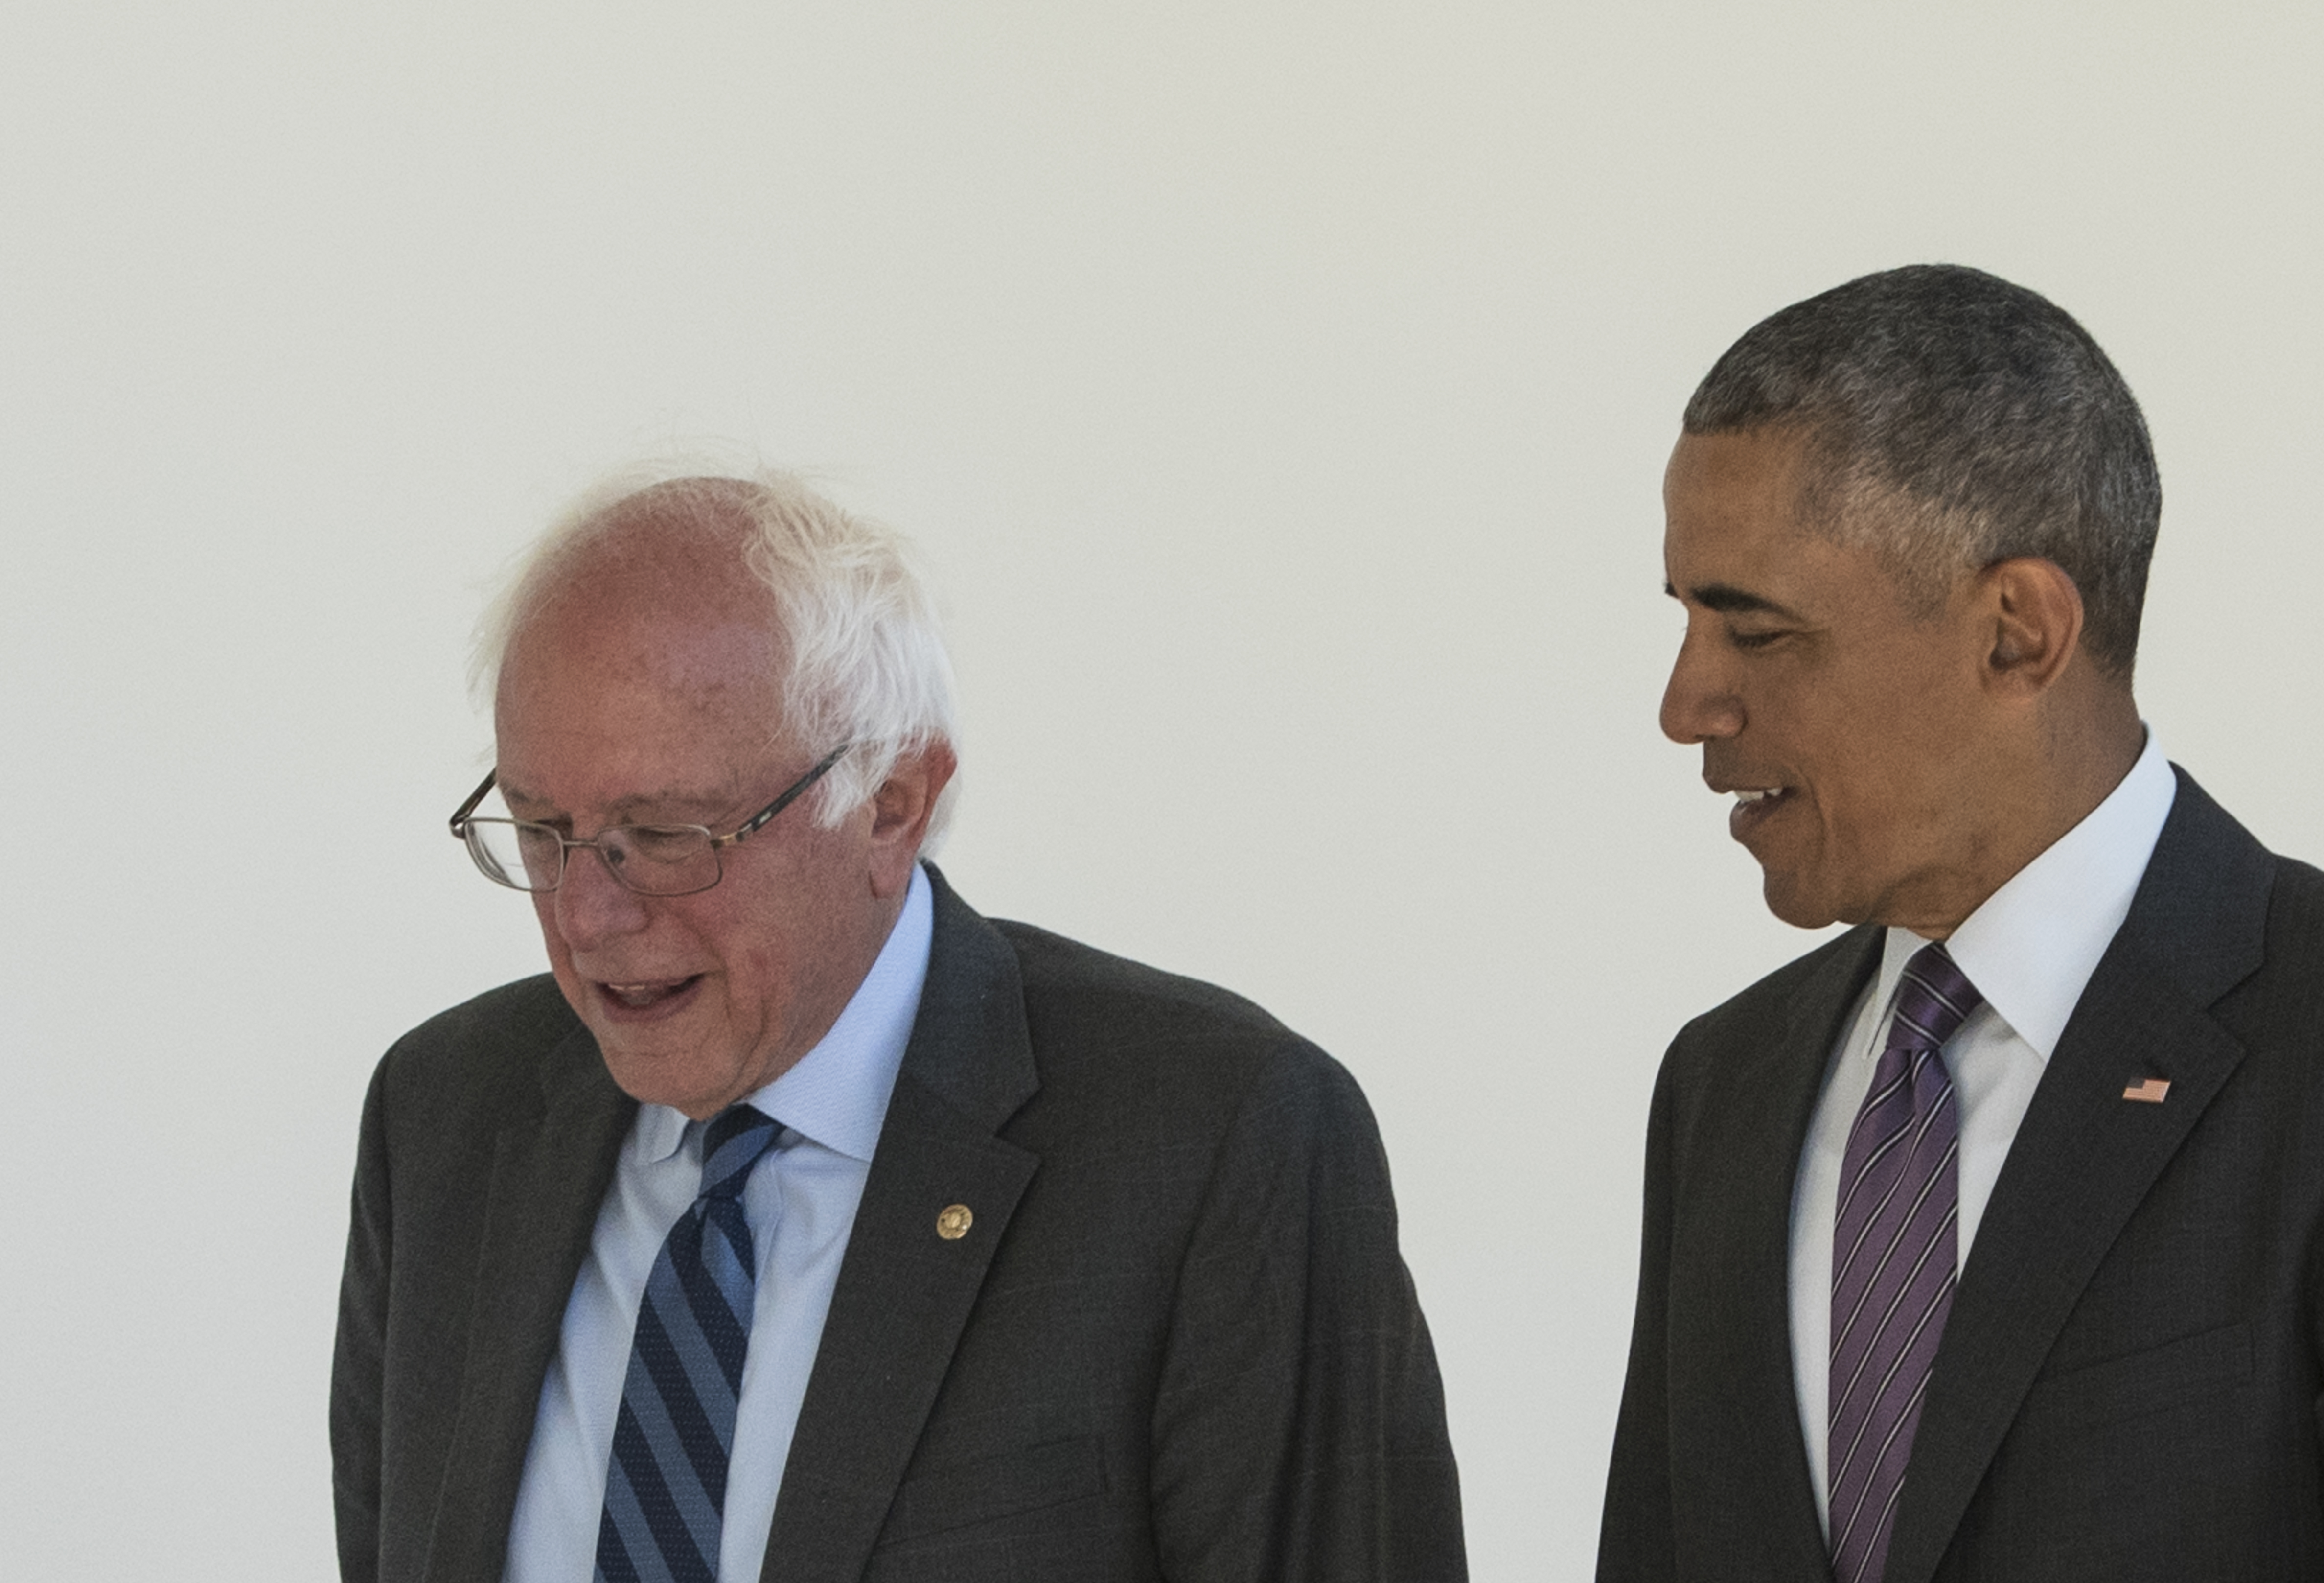 US President Barack Obama (R) walks with Democratic presidential candidate Bernie Sanders through the Colonnade for a meeting in the Oval Office on June 9, 2016 at the White House in Washington, DC. / AFP PHOTO / MANDEL NGAN